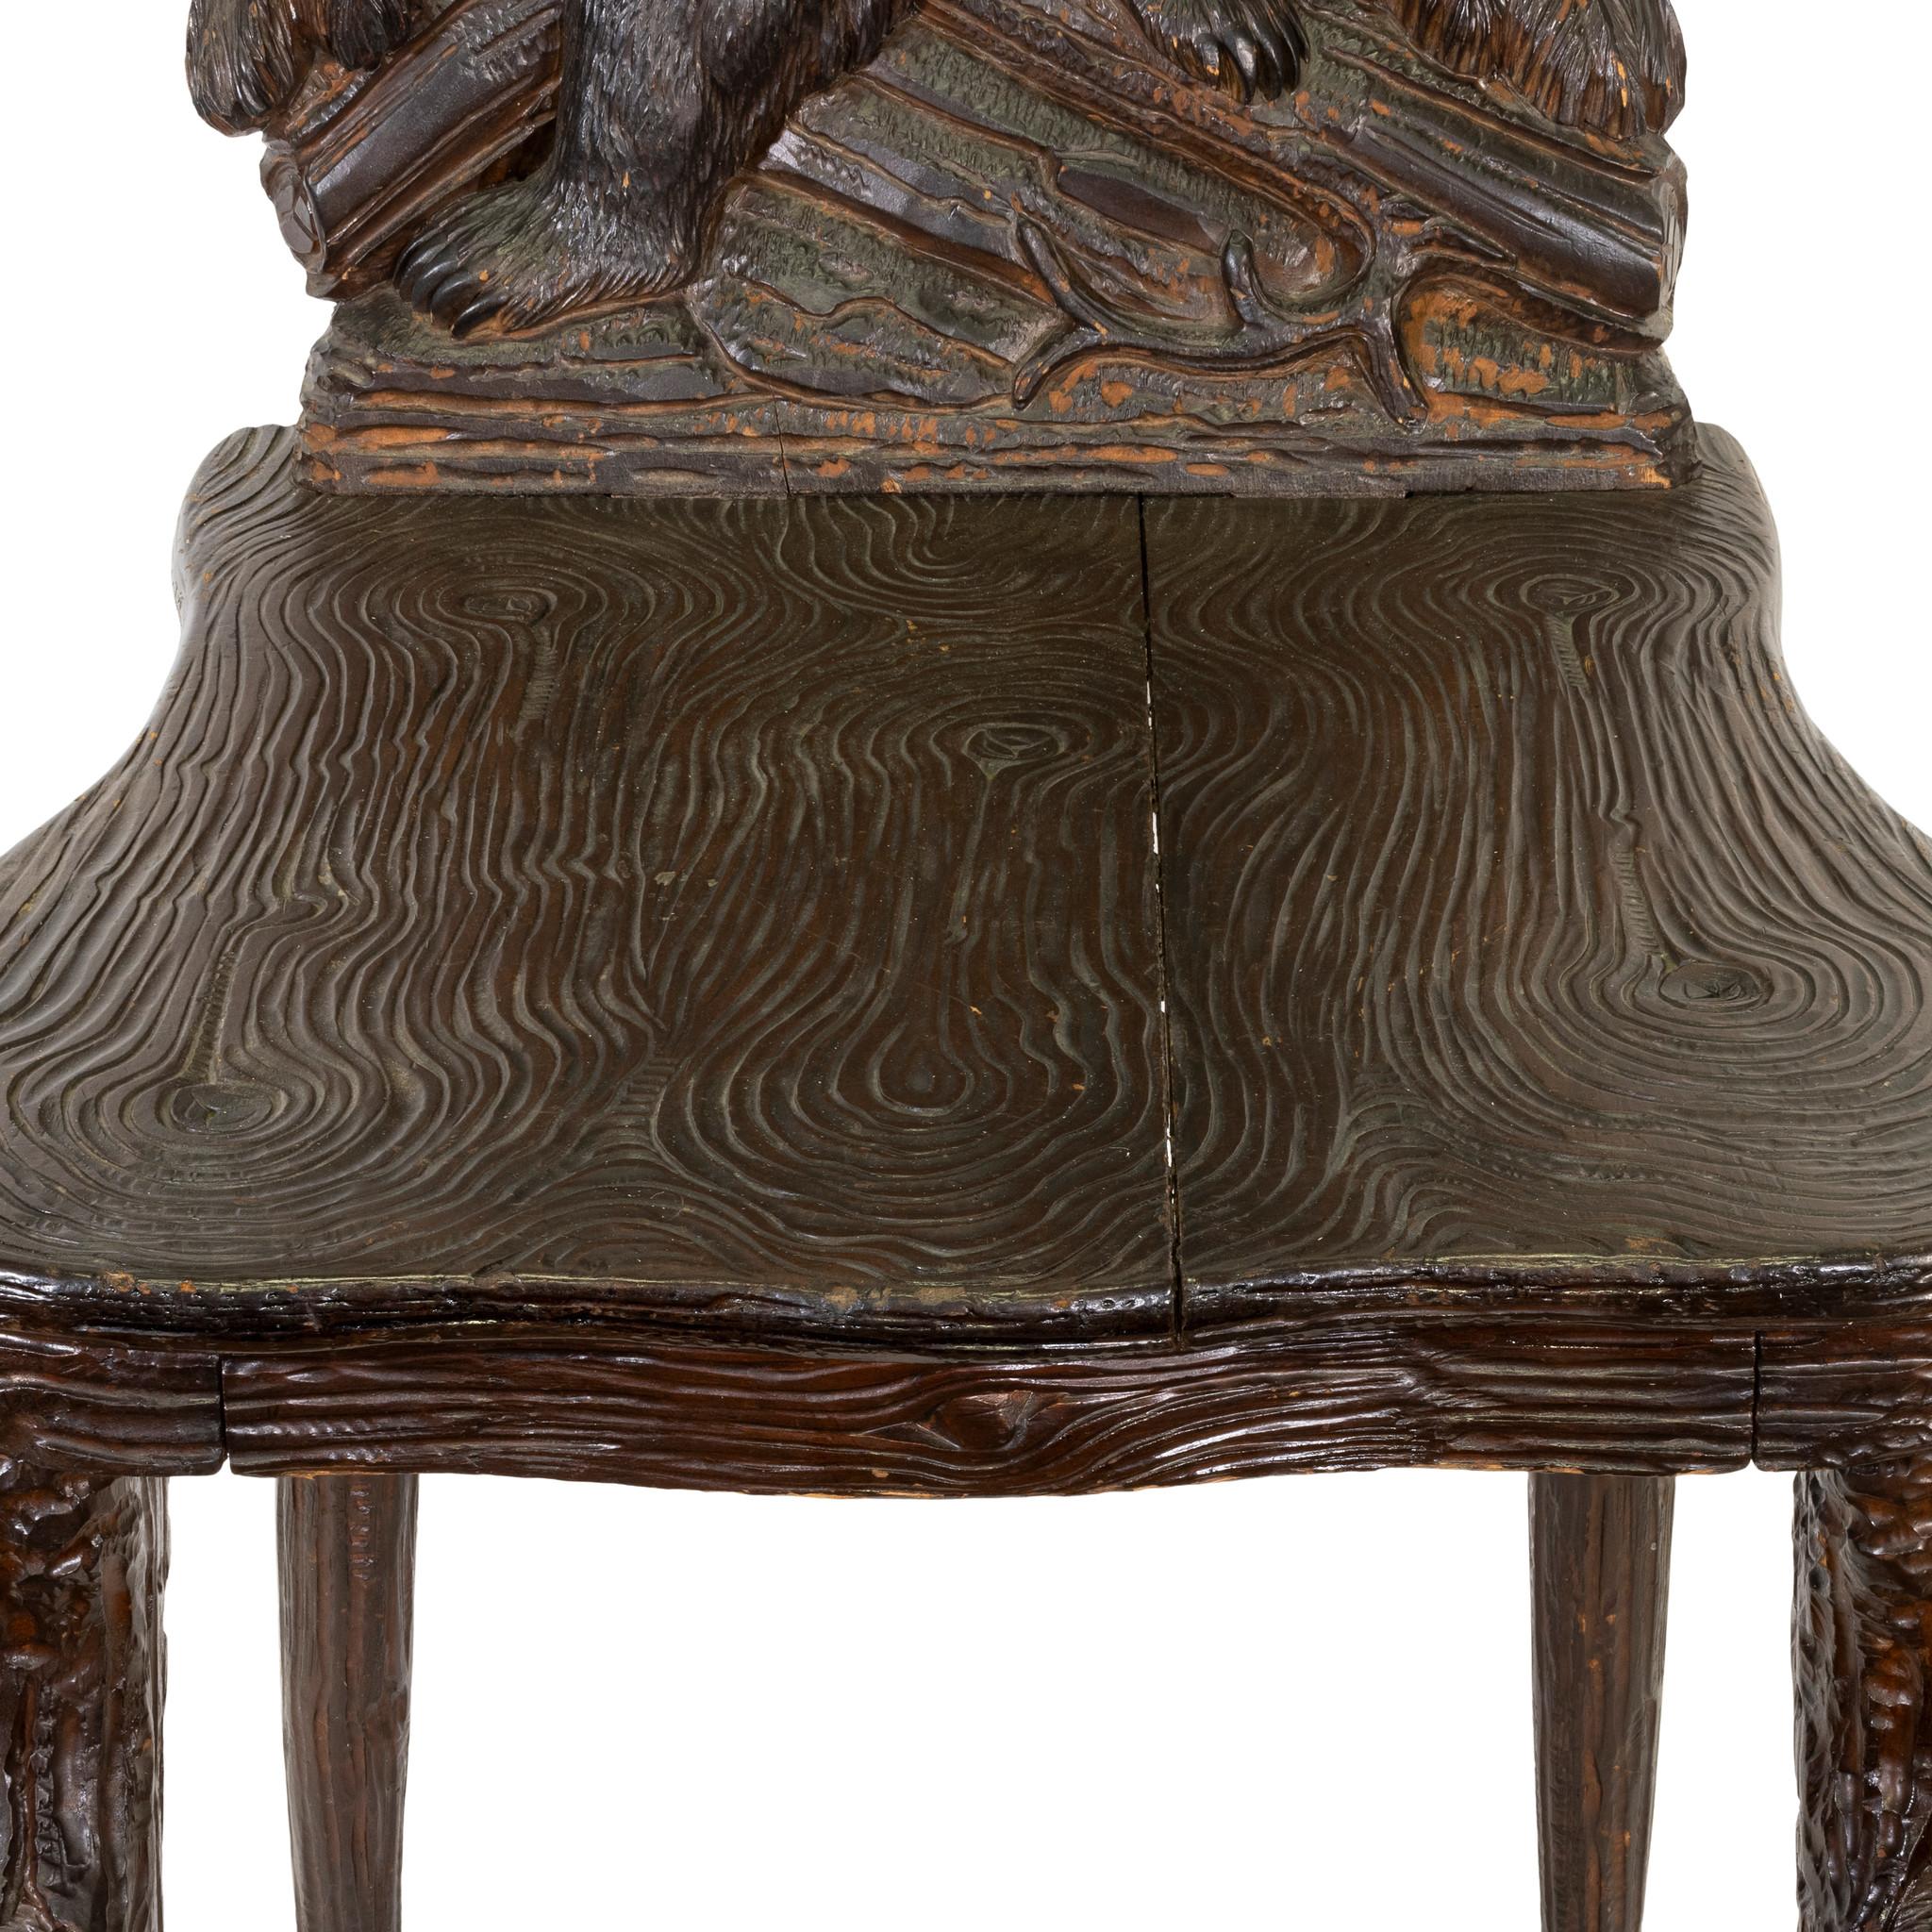 Black Forest Swiss carved chair having bear on fallen log. Carved bear on lifting seat which once had a music box. Part of the Brienz collection plate 26. 

Origin: Swiss
Period: Last quarter of the 19th century
Dimensions: 38